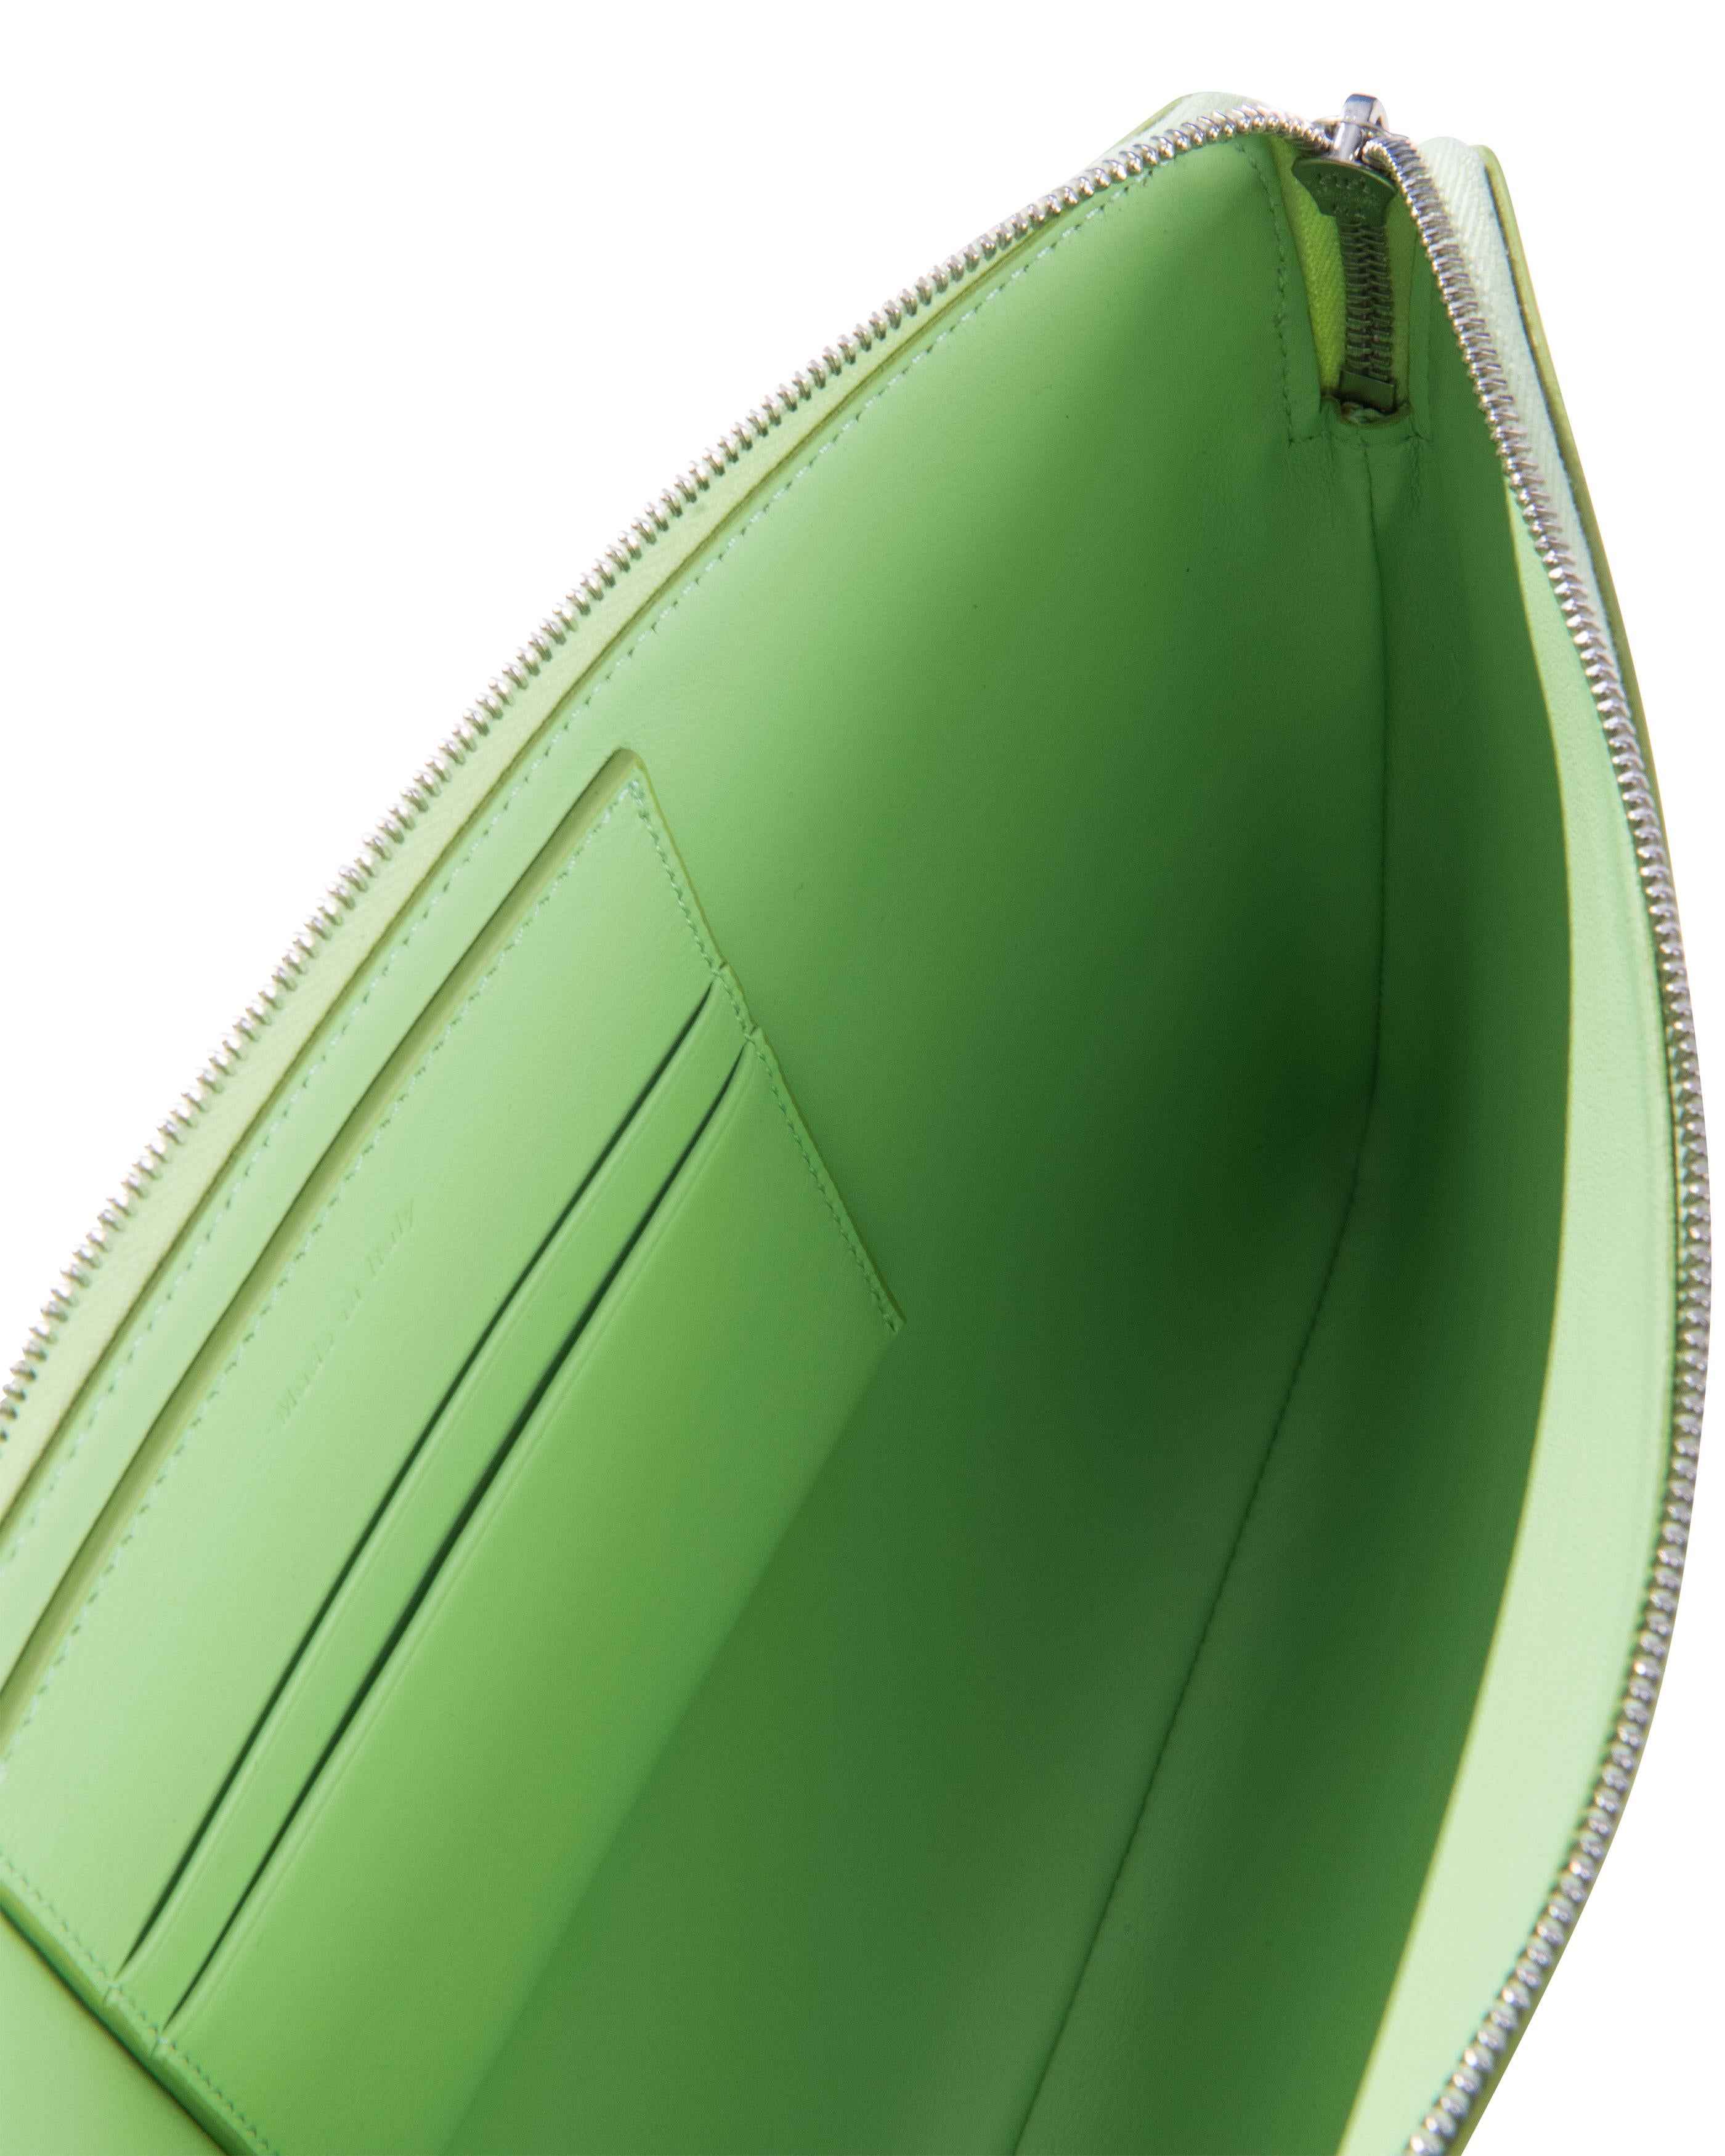 S/S 2018 Old Céline by Phoebe Philo PVC Handbag with Green Interior Clutch For Sale 5